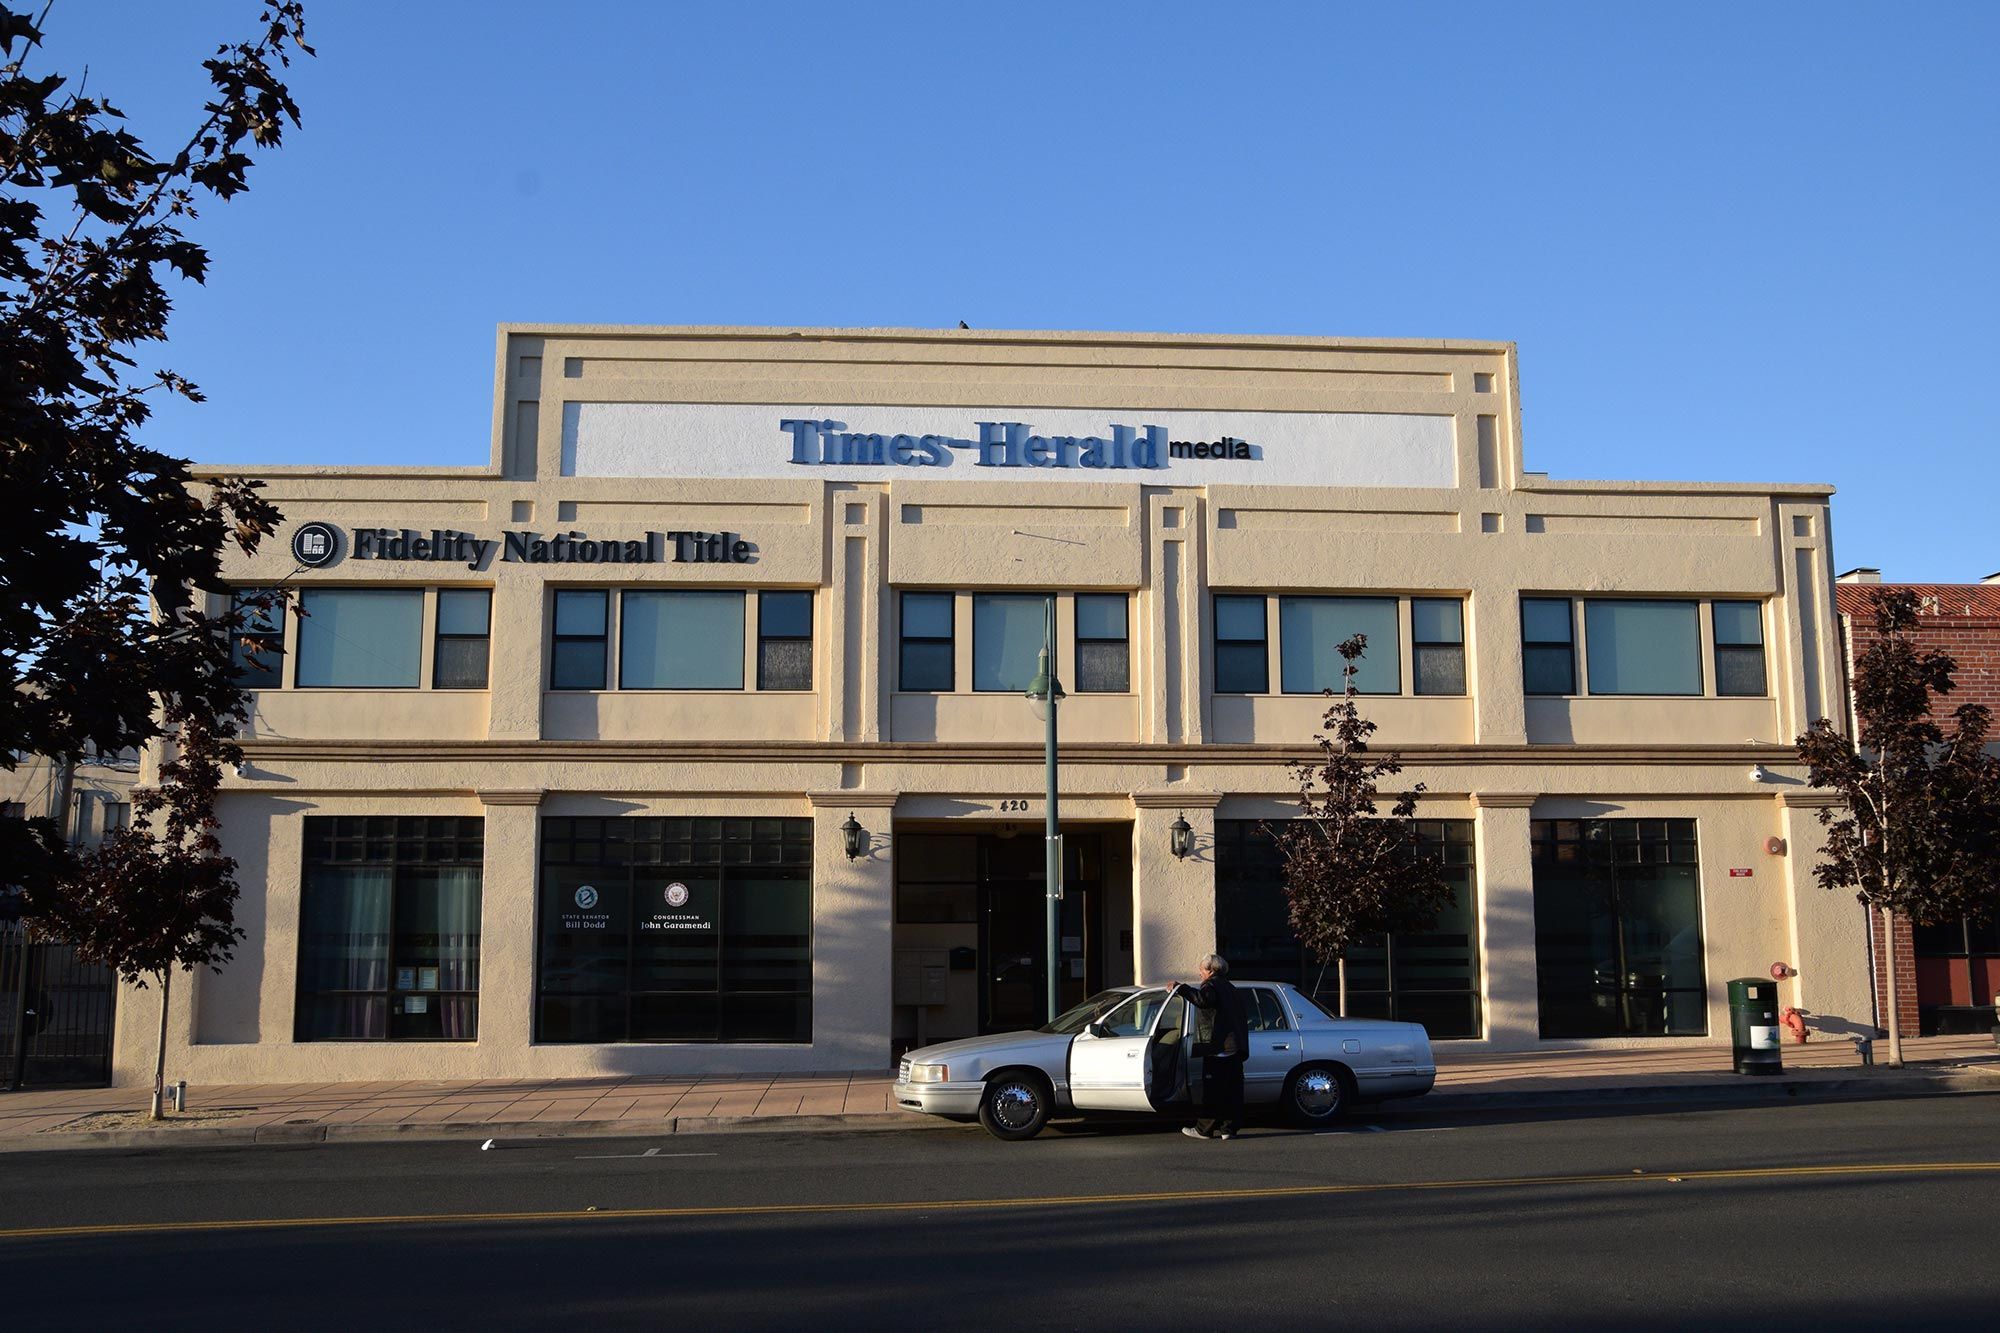 The Vallejo Times-Herald building in downtown Vallejo